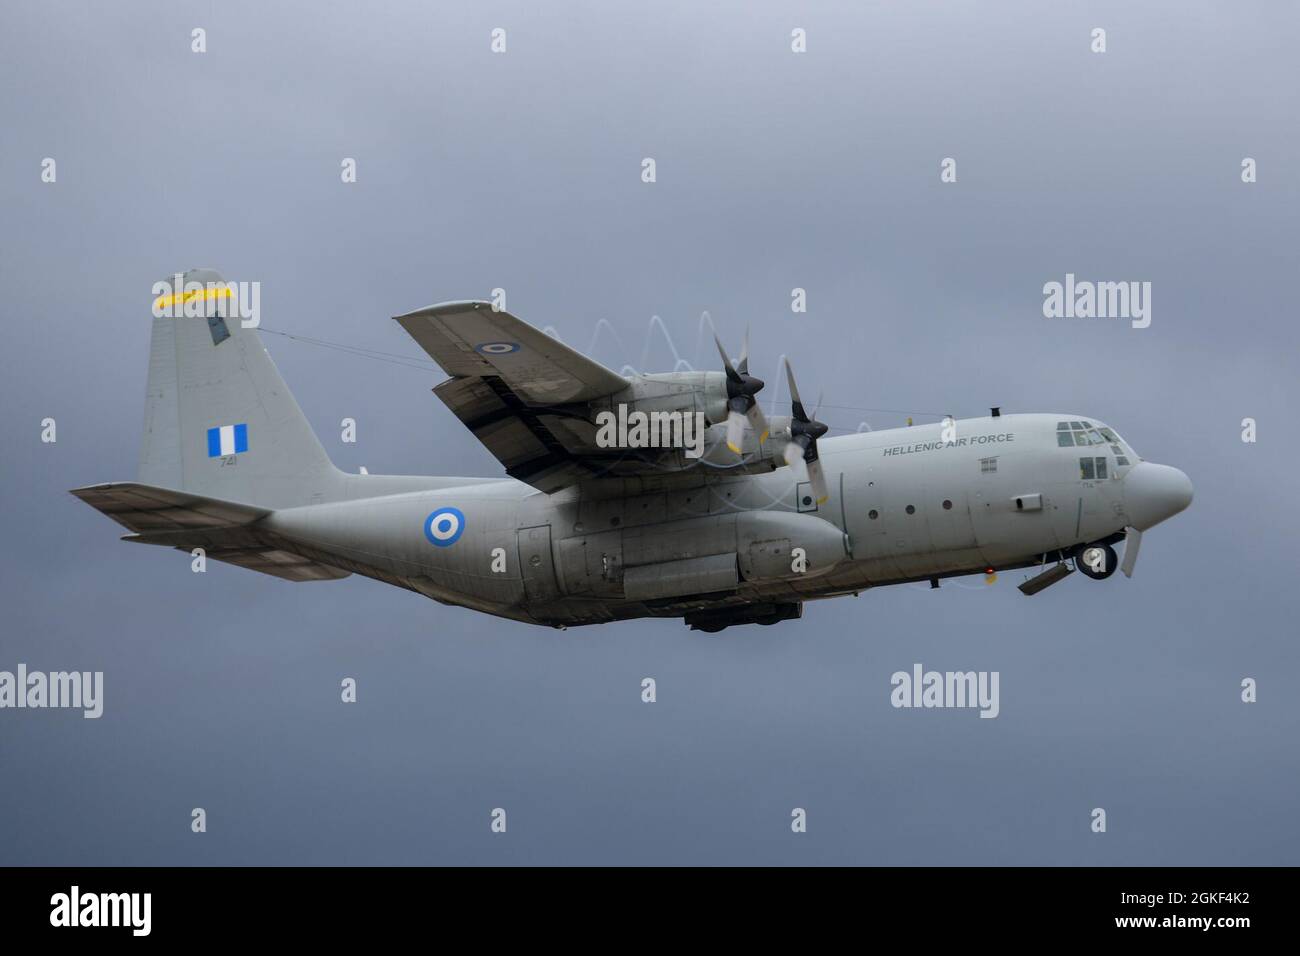 A Hellenic air force (HAF) C-130 Hercules participating in the INIOCHOS 21 exercise takes off from Aviano Air Base, Italy, April 6, 2021. INIOCHOS 21 is an annual exercise held at Andravida Air Base in Greece that enhances professional relationships and improves overall coordination with allies and partner militaries. Stock Photo